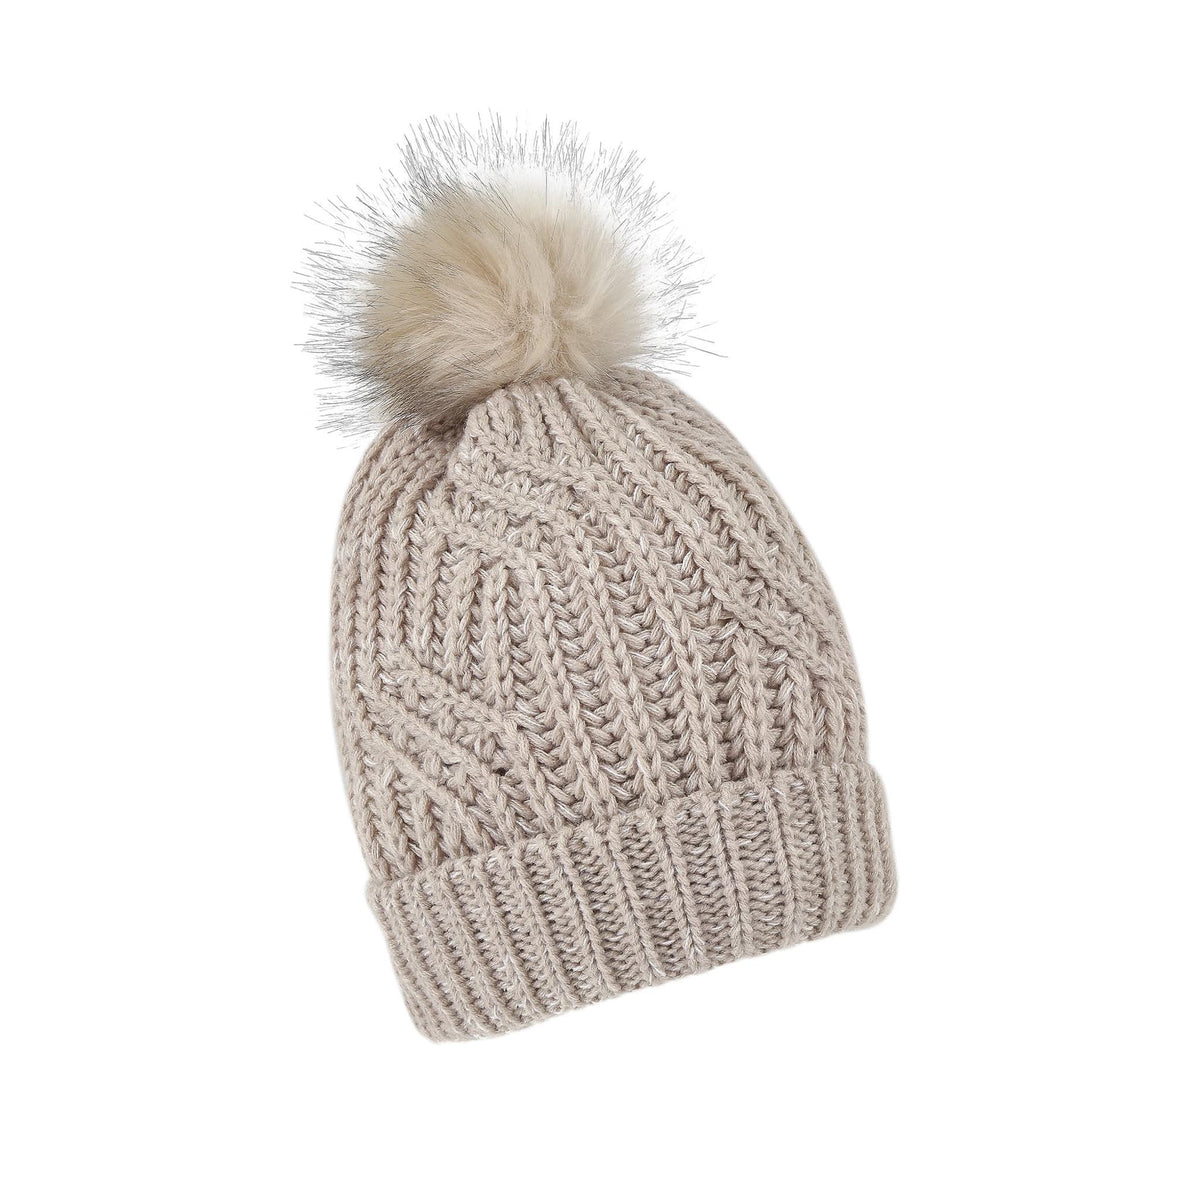 Only Curls Satin Lined Knitted Beanie Hat - Sand Melange with Pom Pom - Only Curls